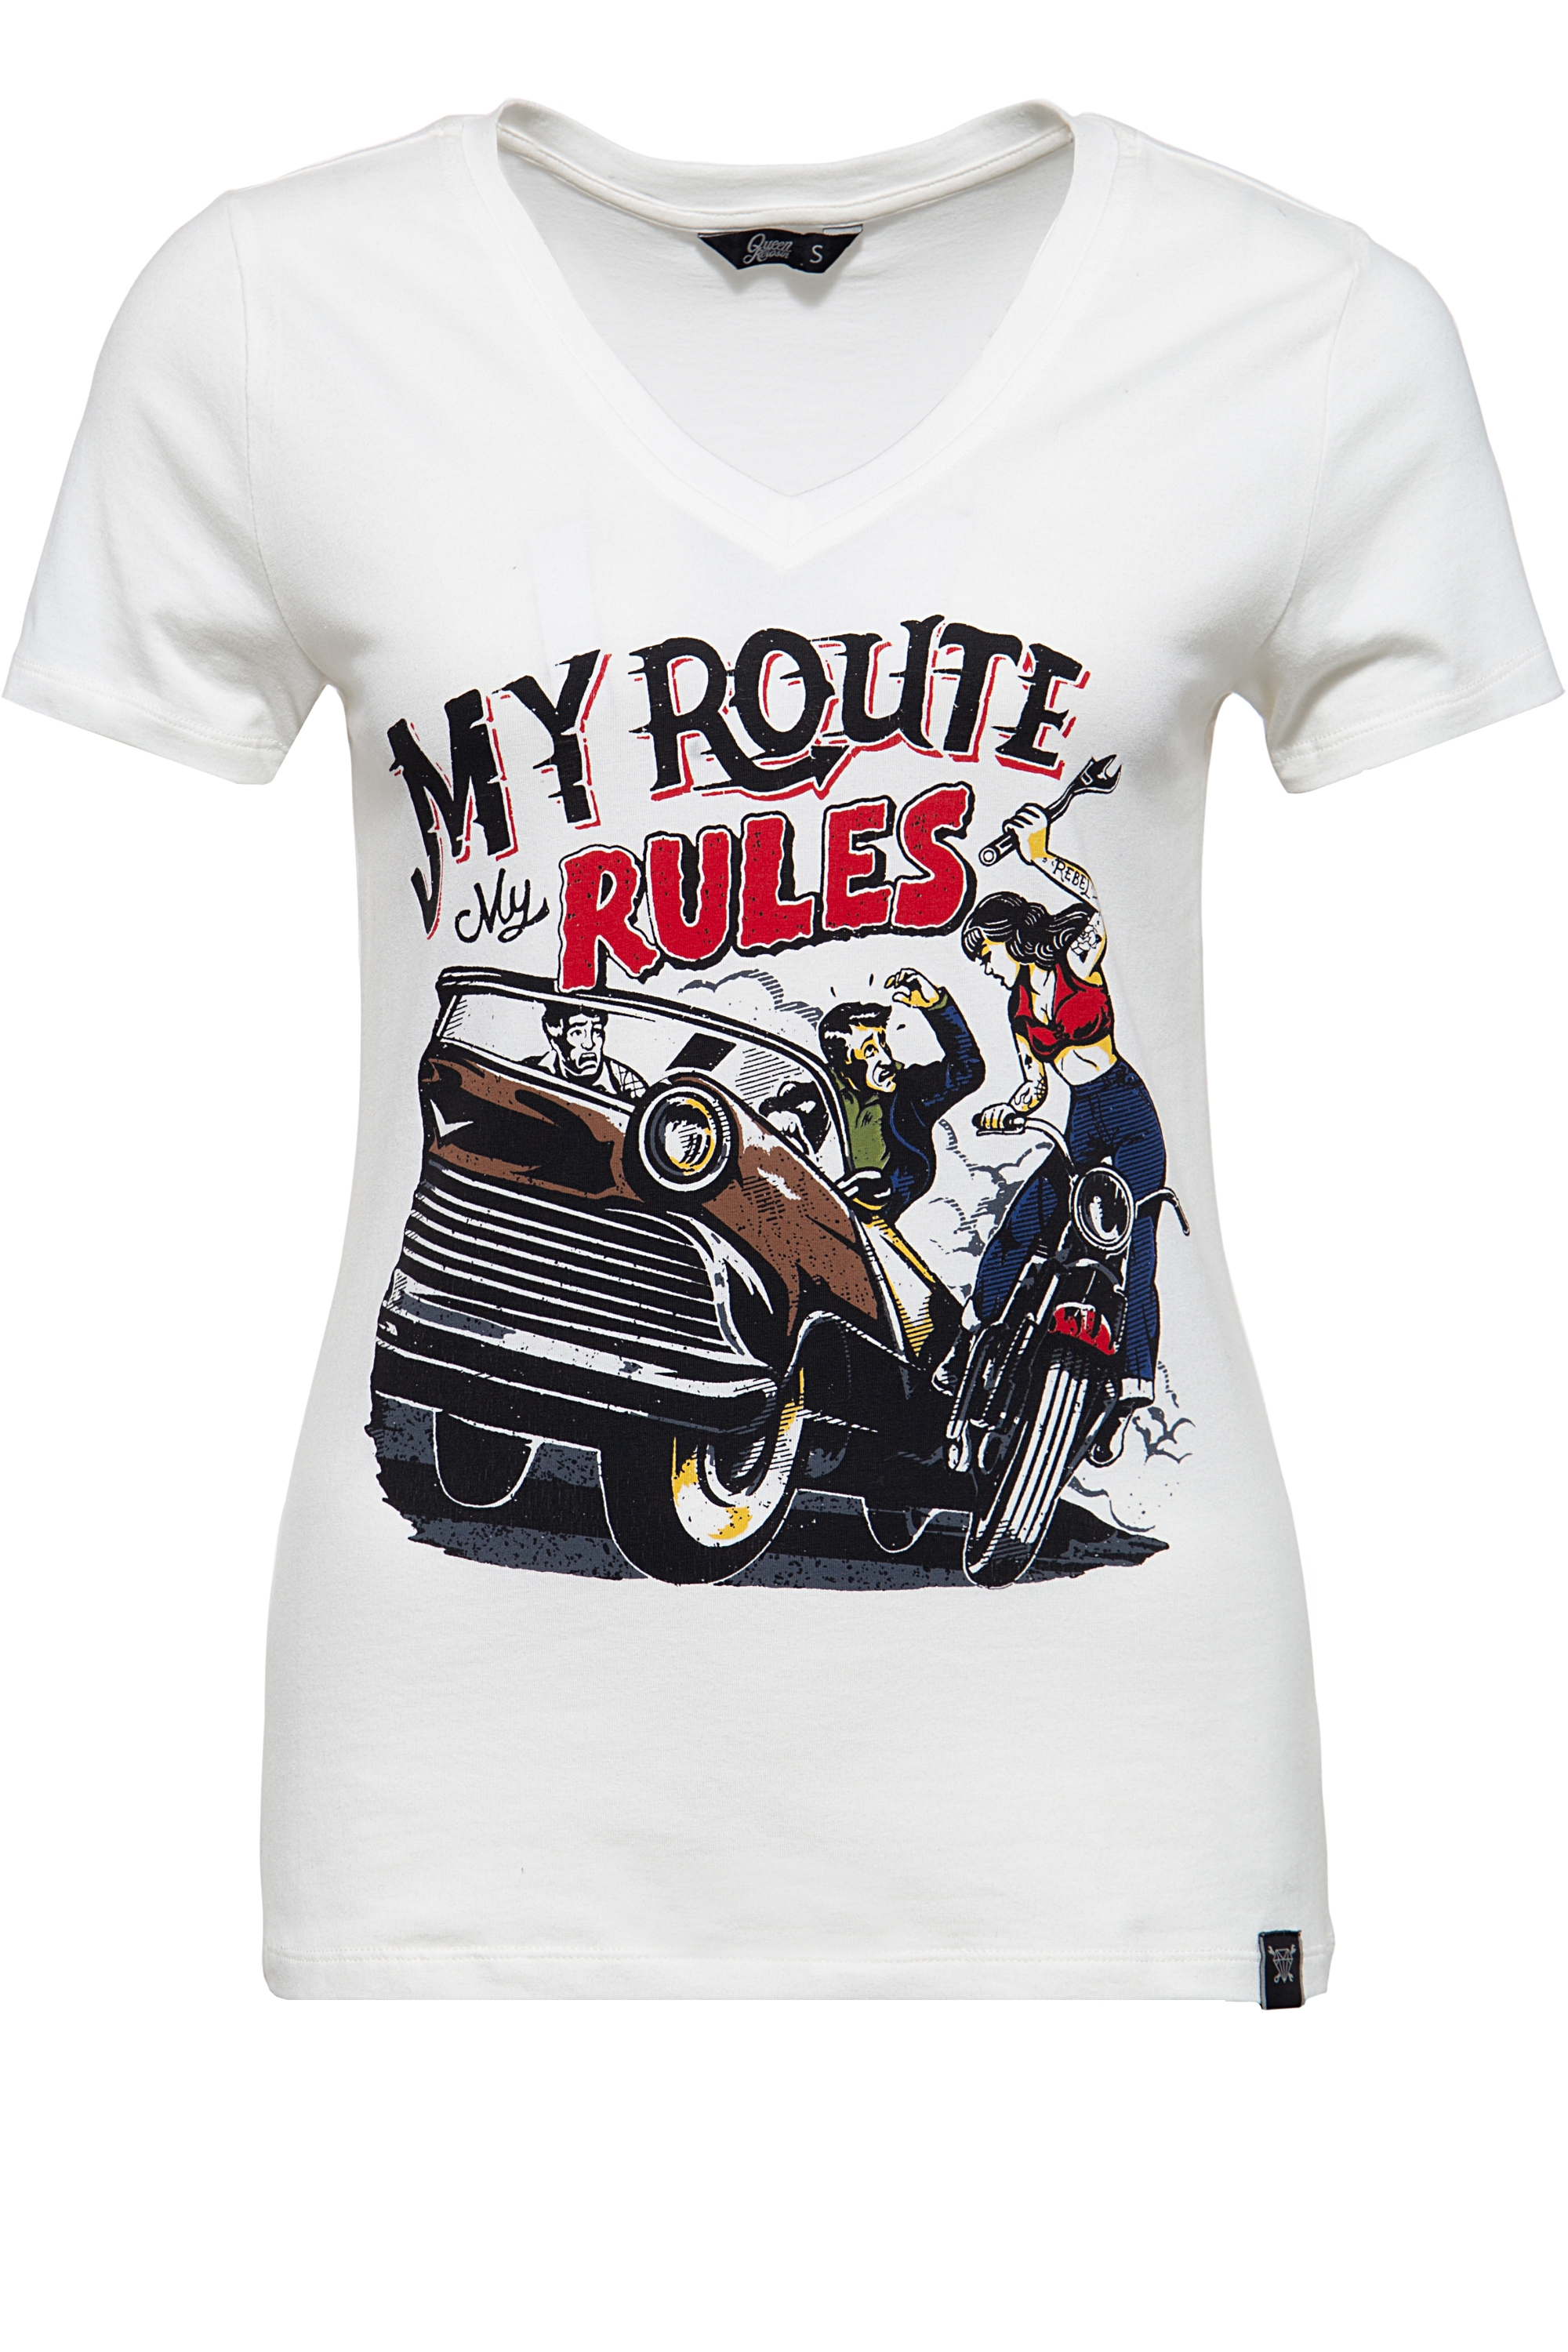 Queen Kerosin T-Shirt - My Route My Rules M